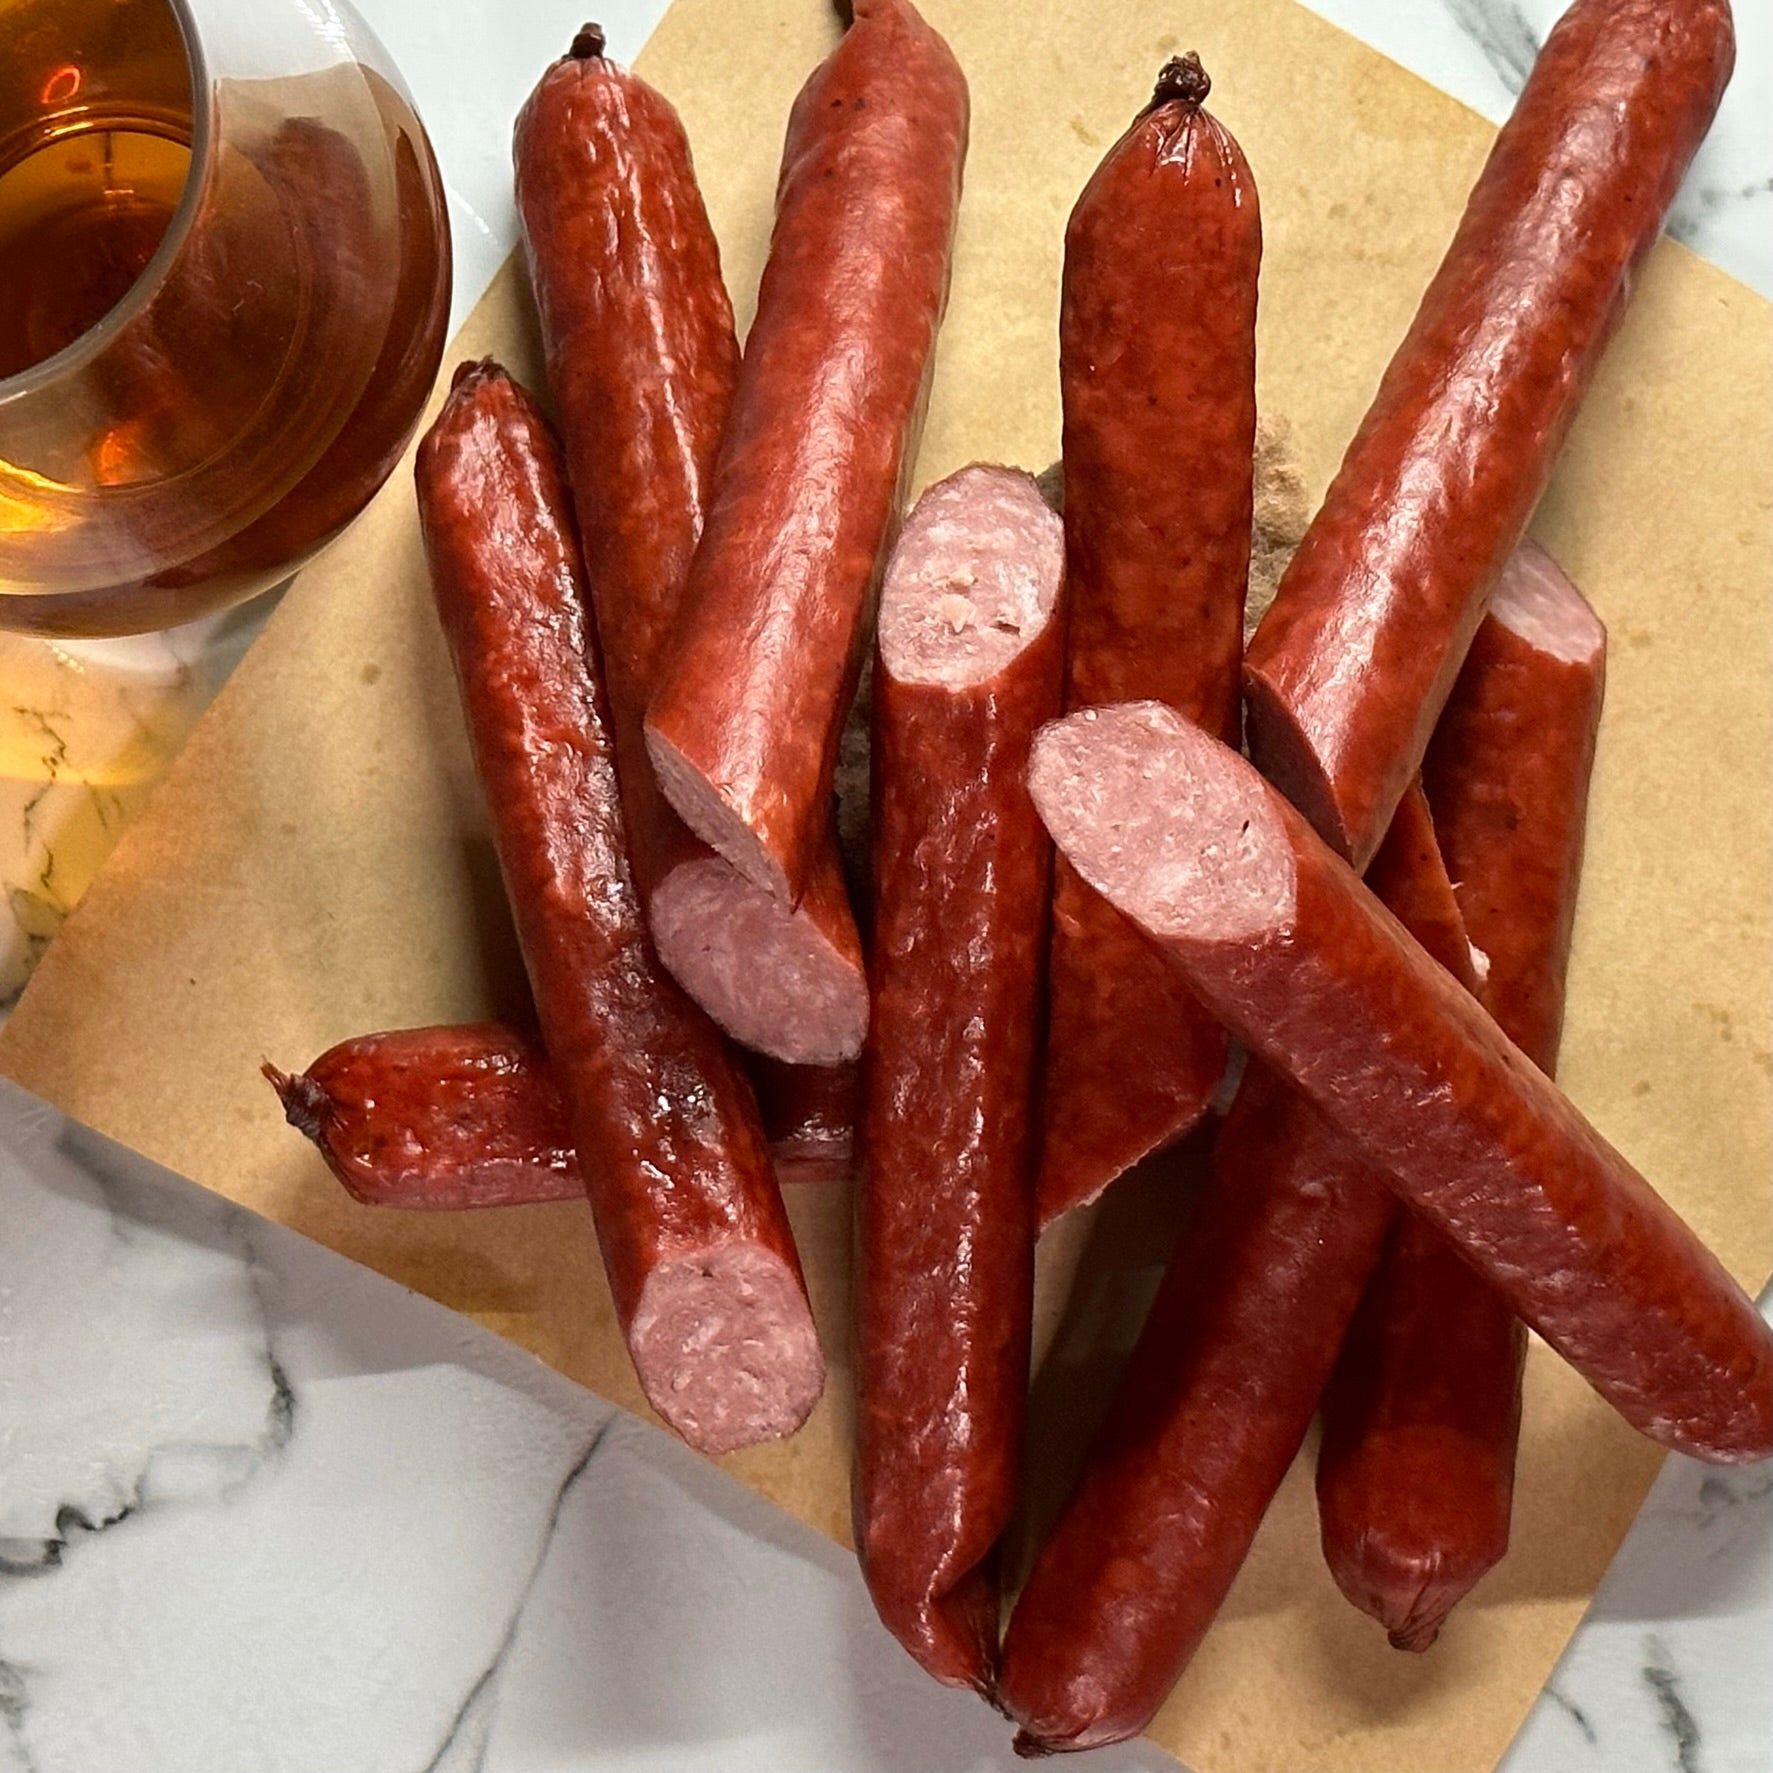 CUT PIECES OF BOURBON INFUSED SNACK STICKS